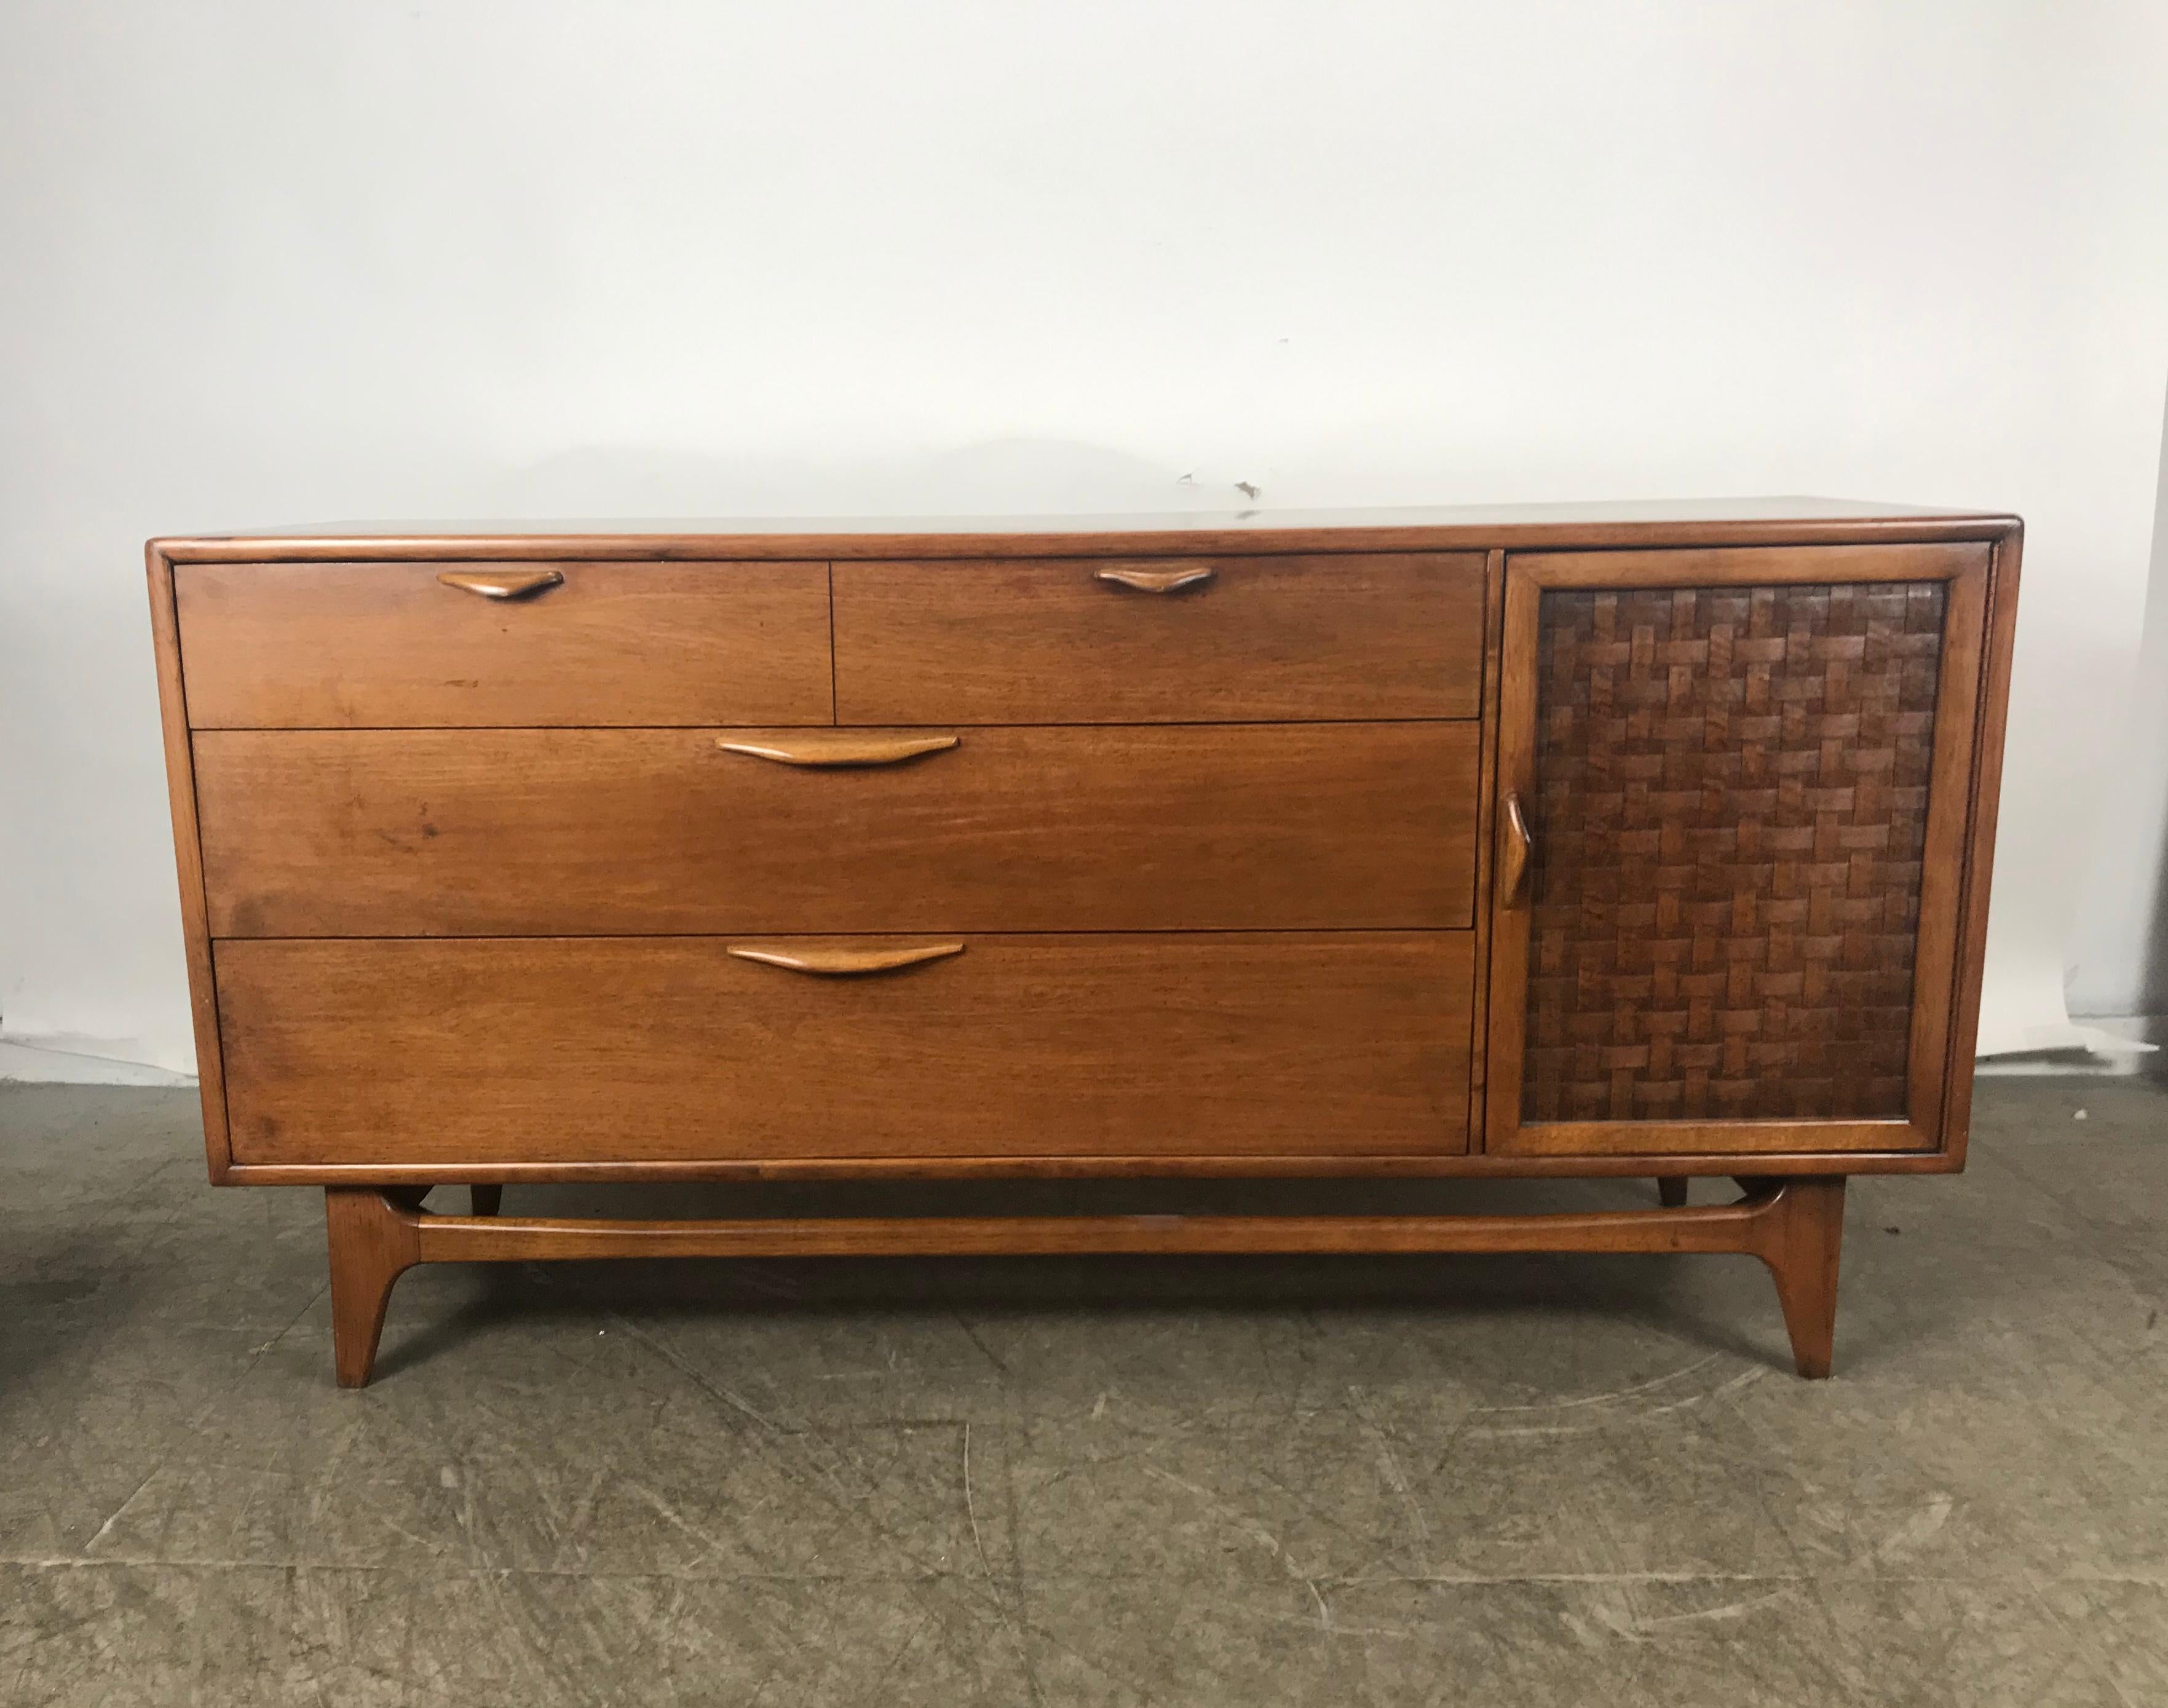 Classic Mid-Century Modern walnut server by Warren Church for lane, wonderful warm walnut patina, sculpted wood hand pulls. Four generous drawers, dovetail joinery, basket weave door with additional drawer. Retains original silverware drawer,